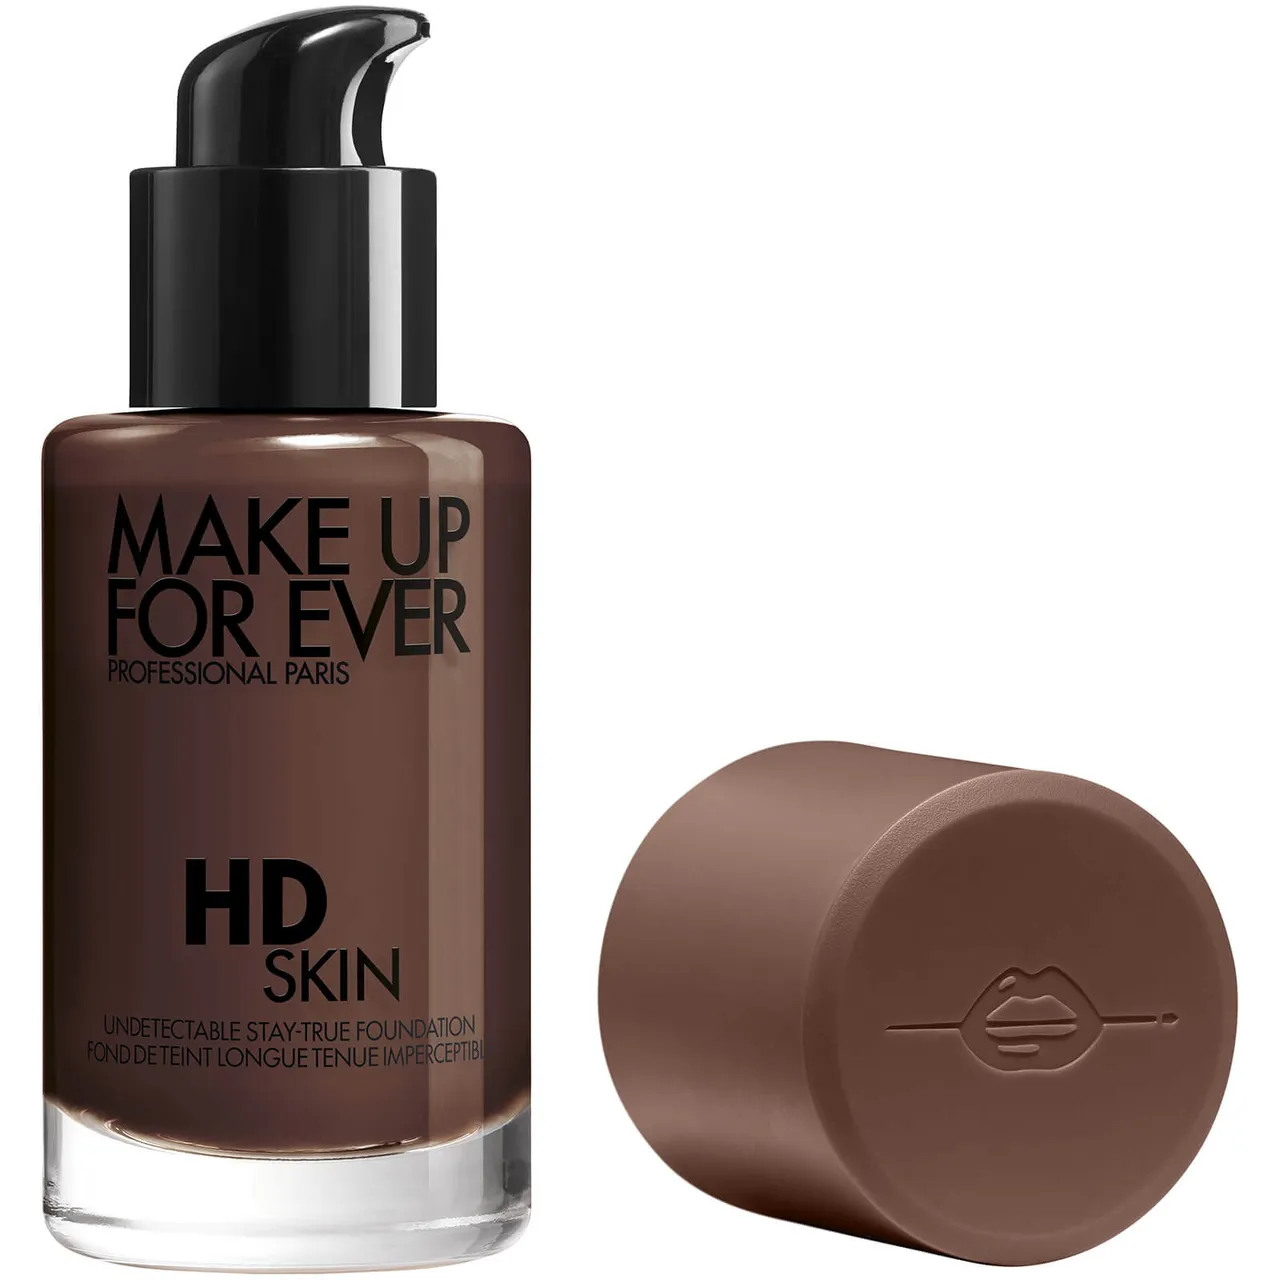 Make Up For Ever HD Skin Foundation 30ml (Various Shades) - 4N78 Ebony